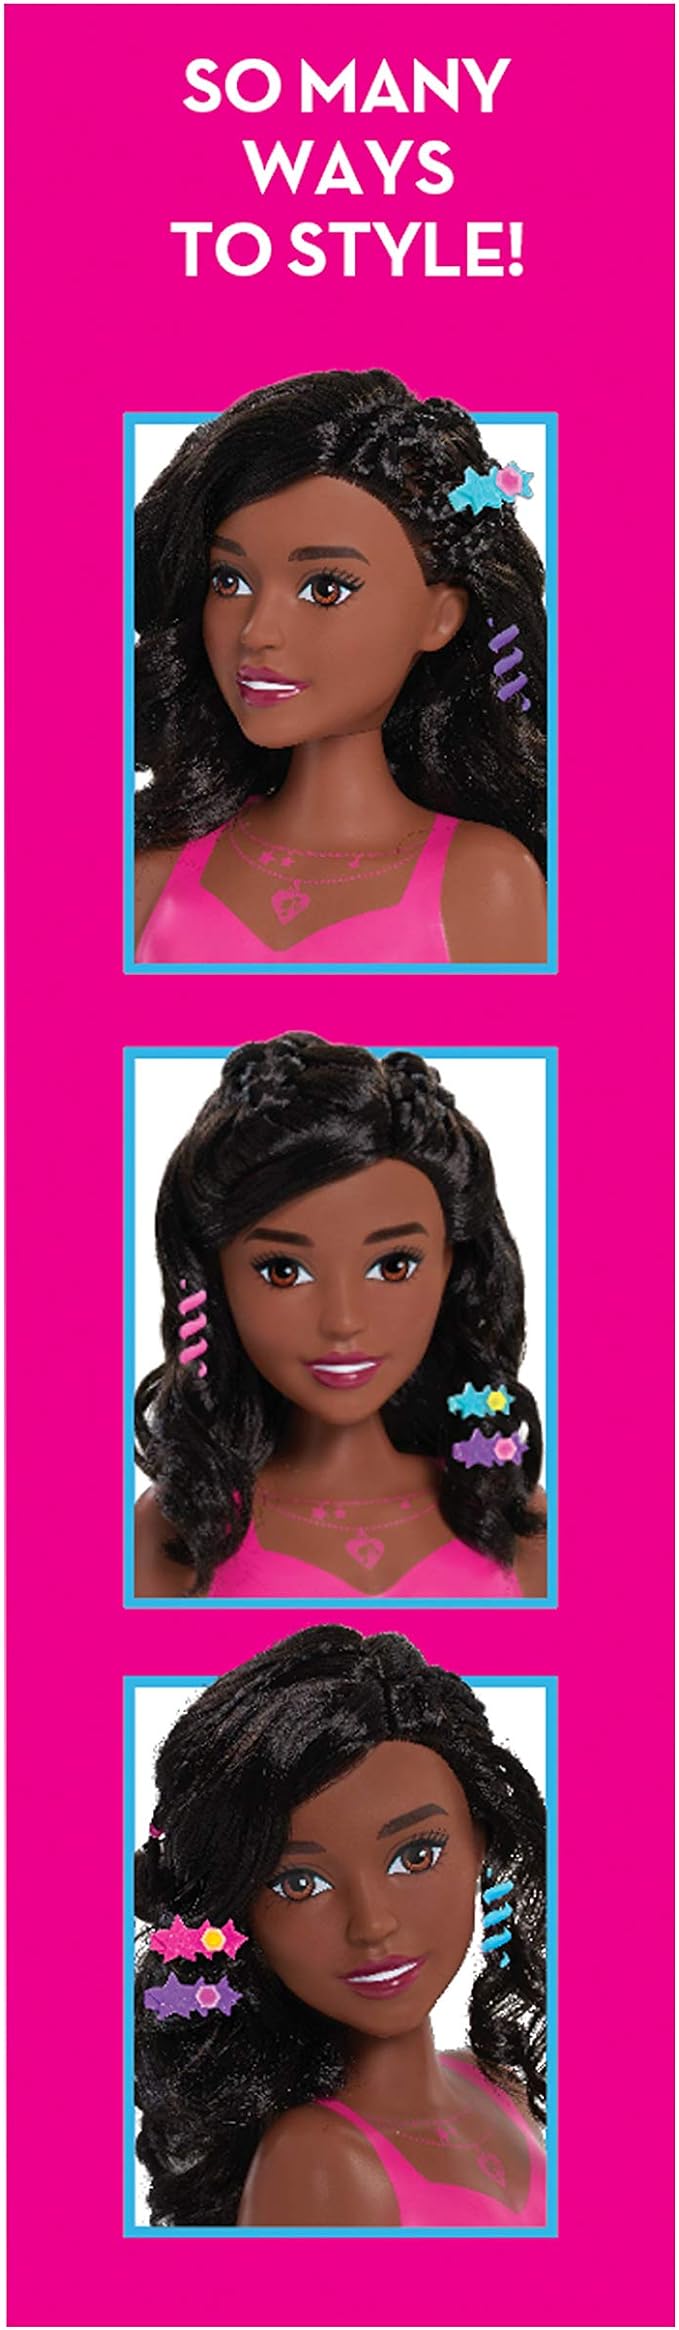 Barbie Fashionista 8-Inch Styling Head, Dark Brown Including Styling Accessories, Hair Styling for Kids